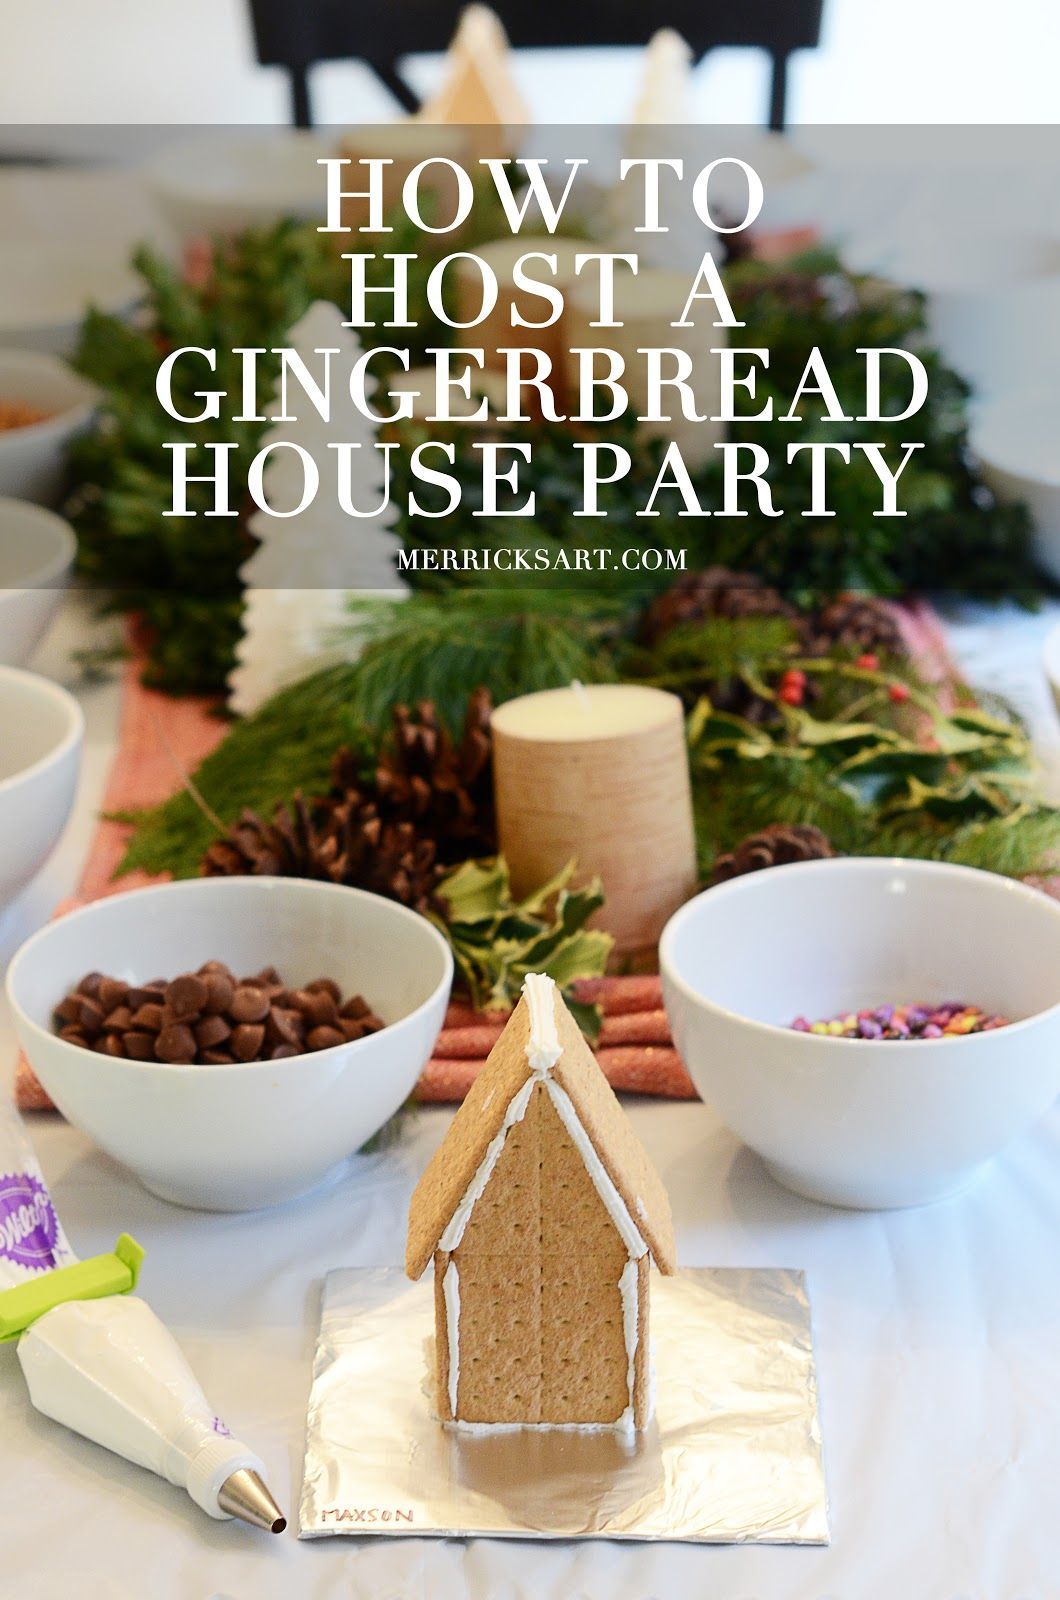 HOW TO HOST A GINGERBREAD HOUSE PARTY -   24 diy house party
 ideas